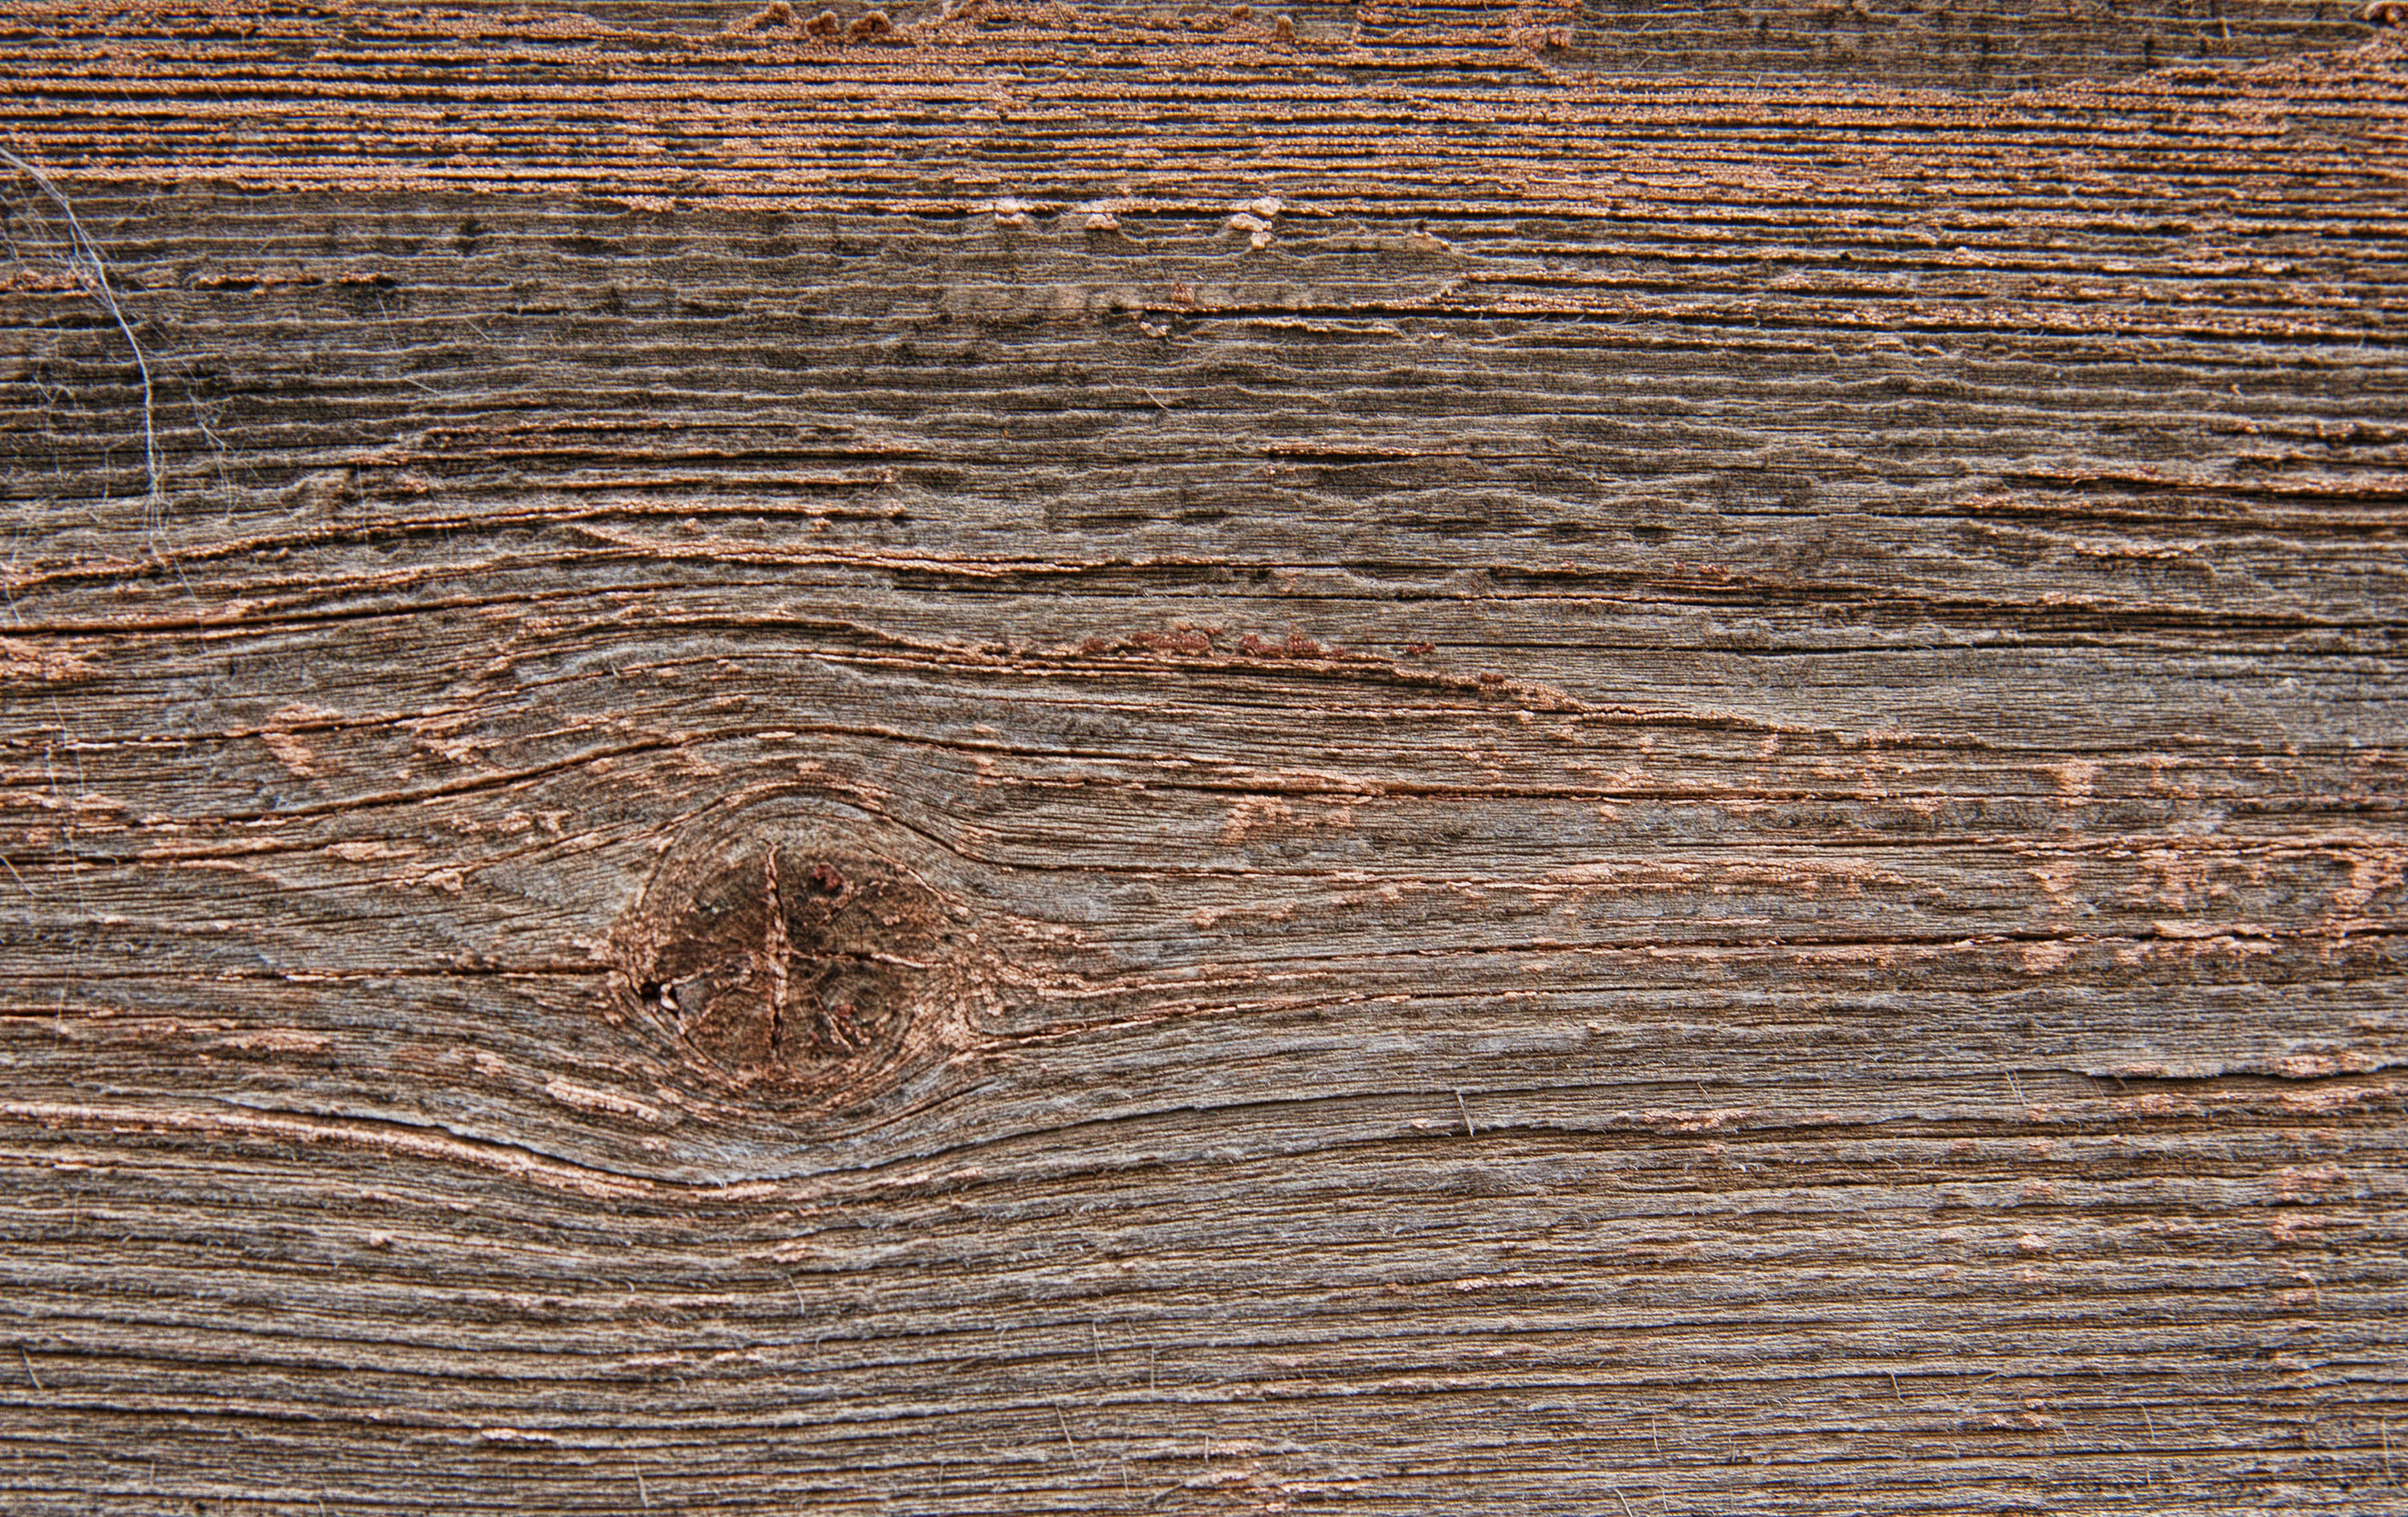 wooden background texture photos wooden background of rough old wood 3000x1890